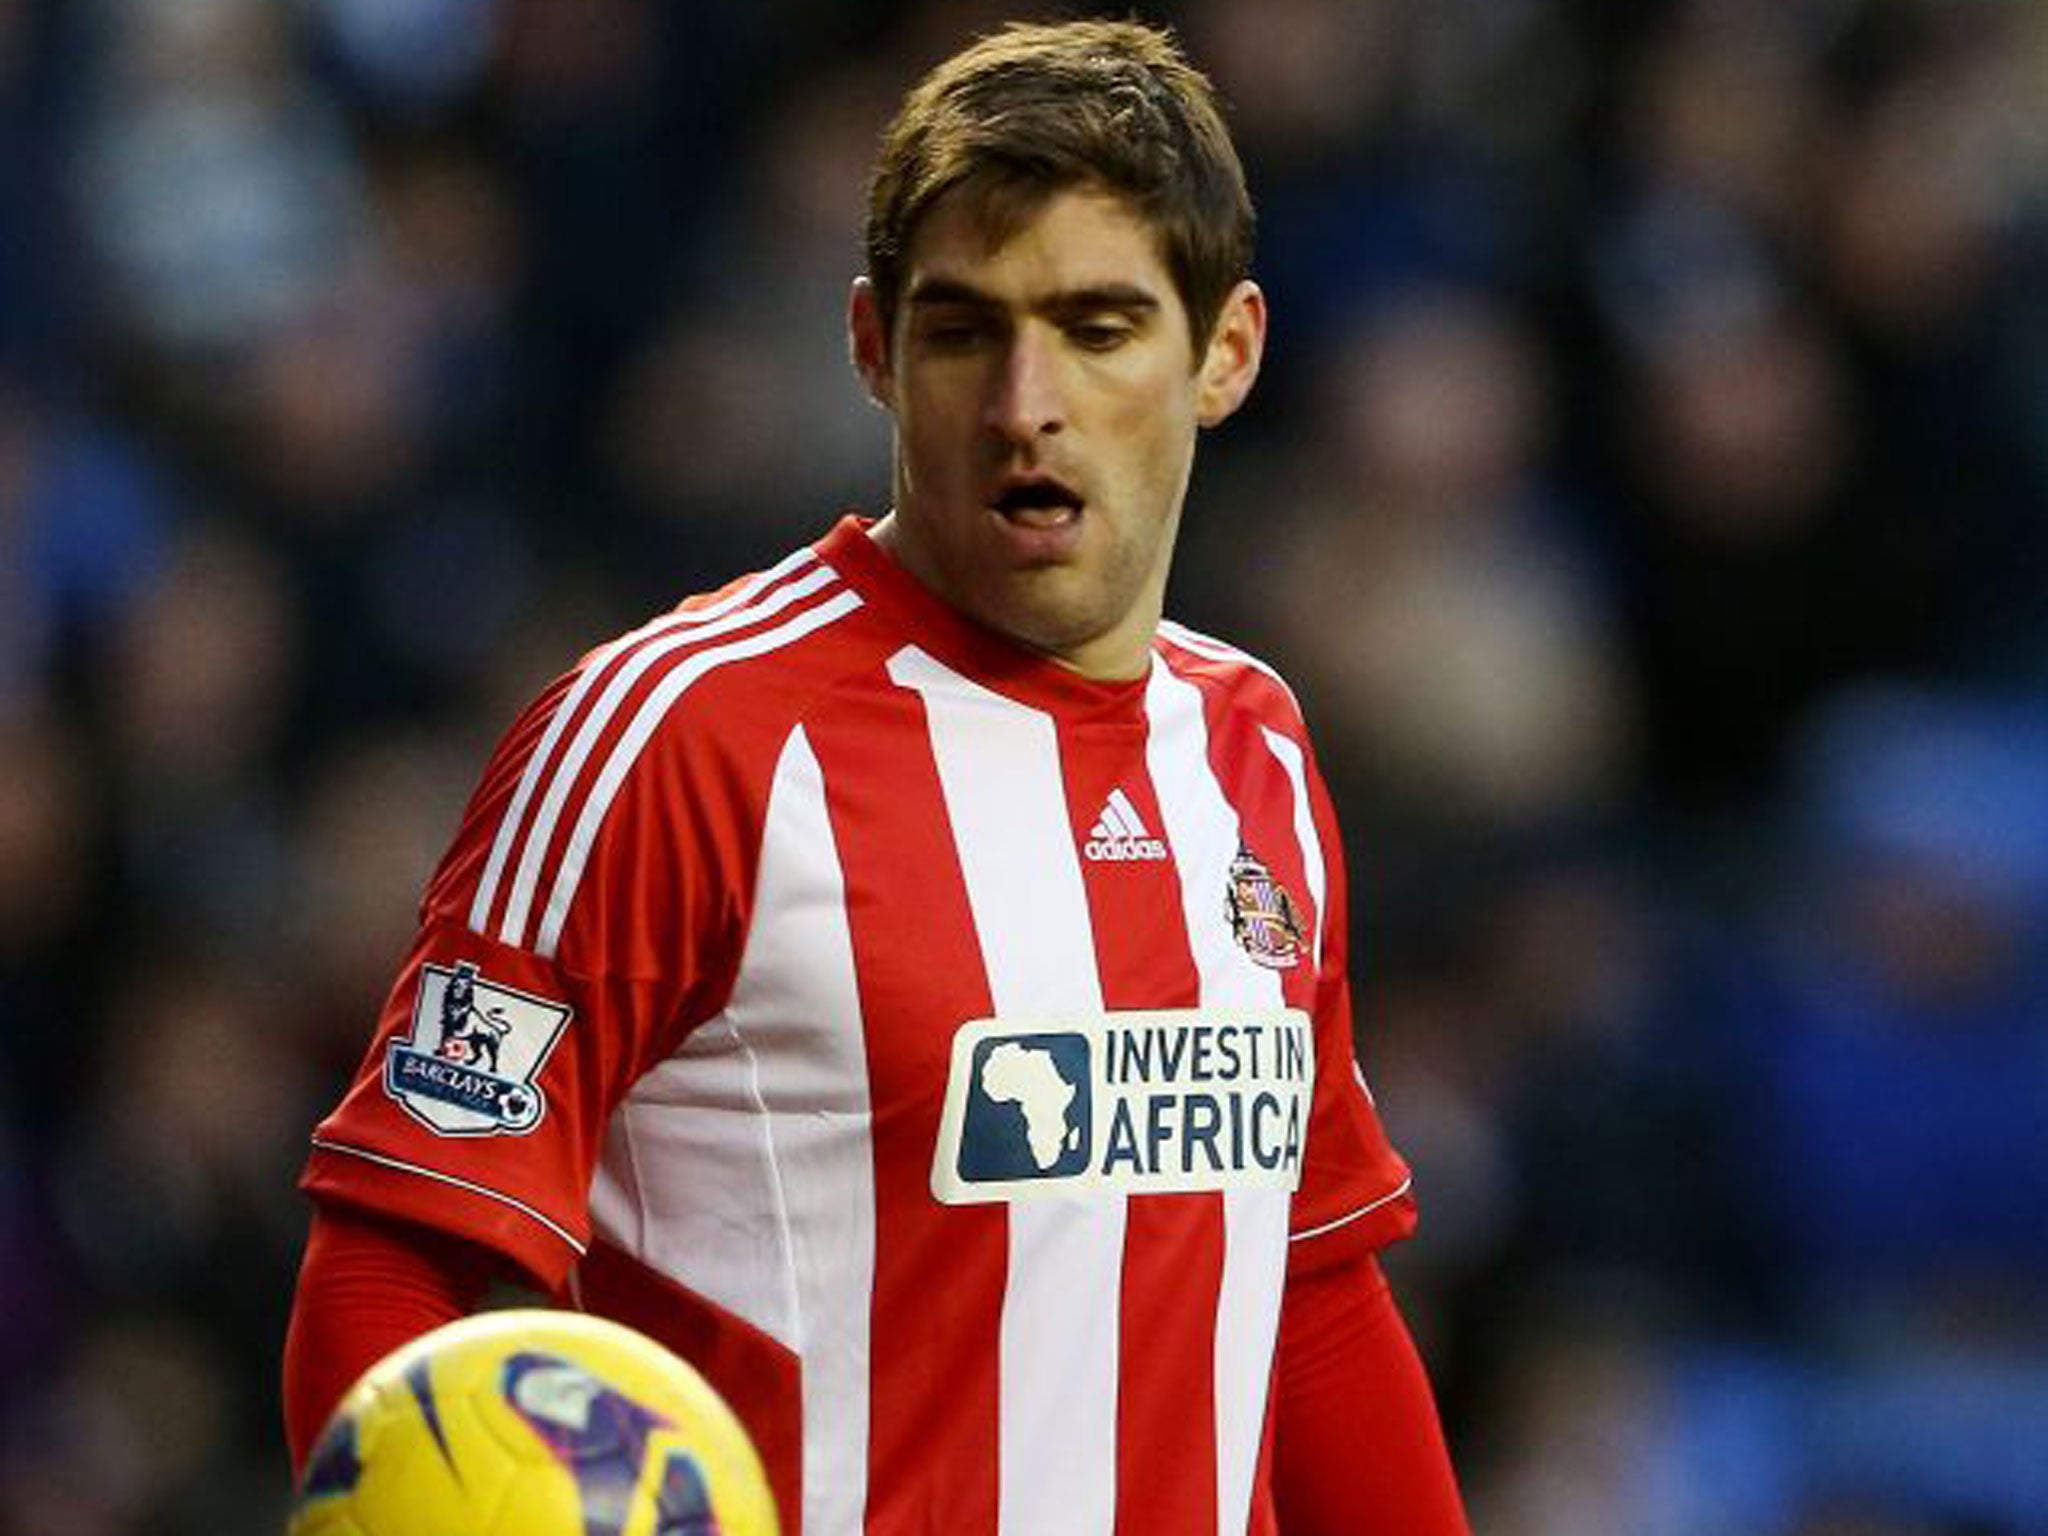 Danny Graham wants to show his commitment to Sunderland